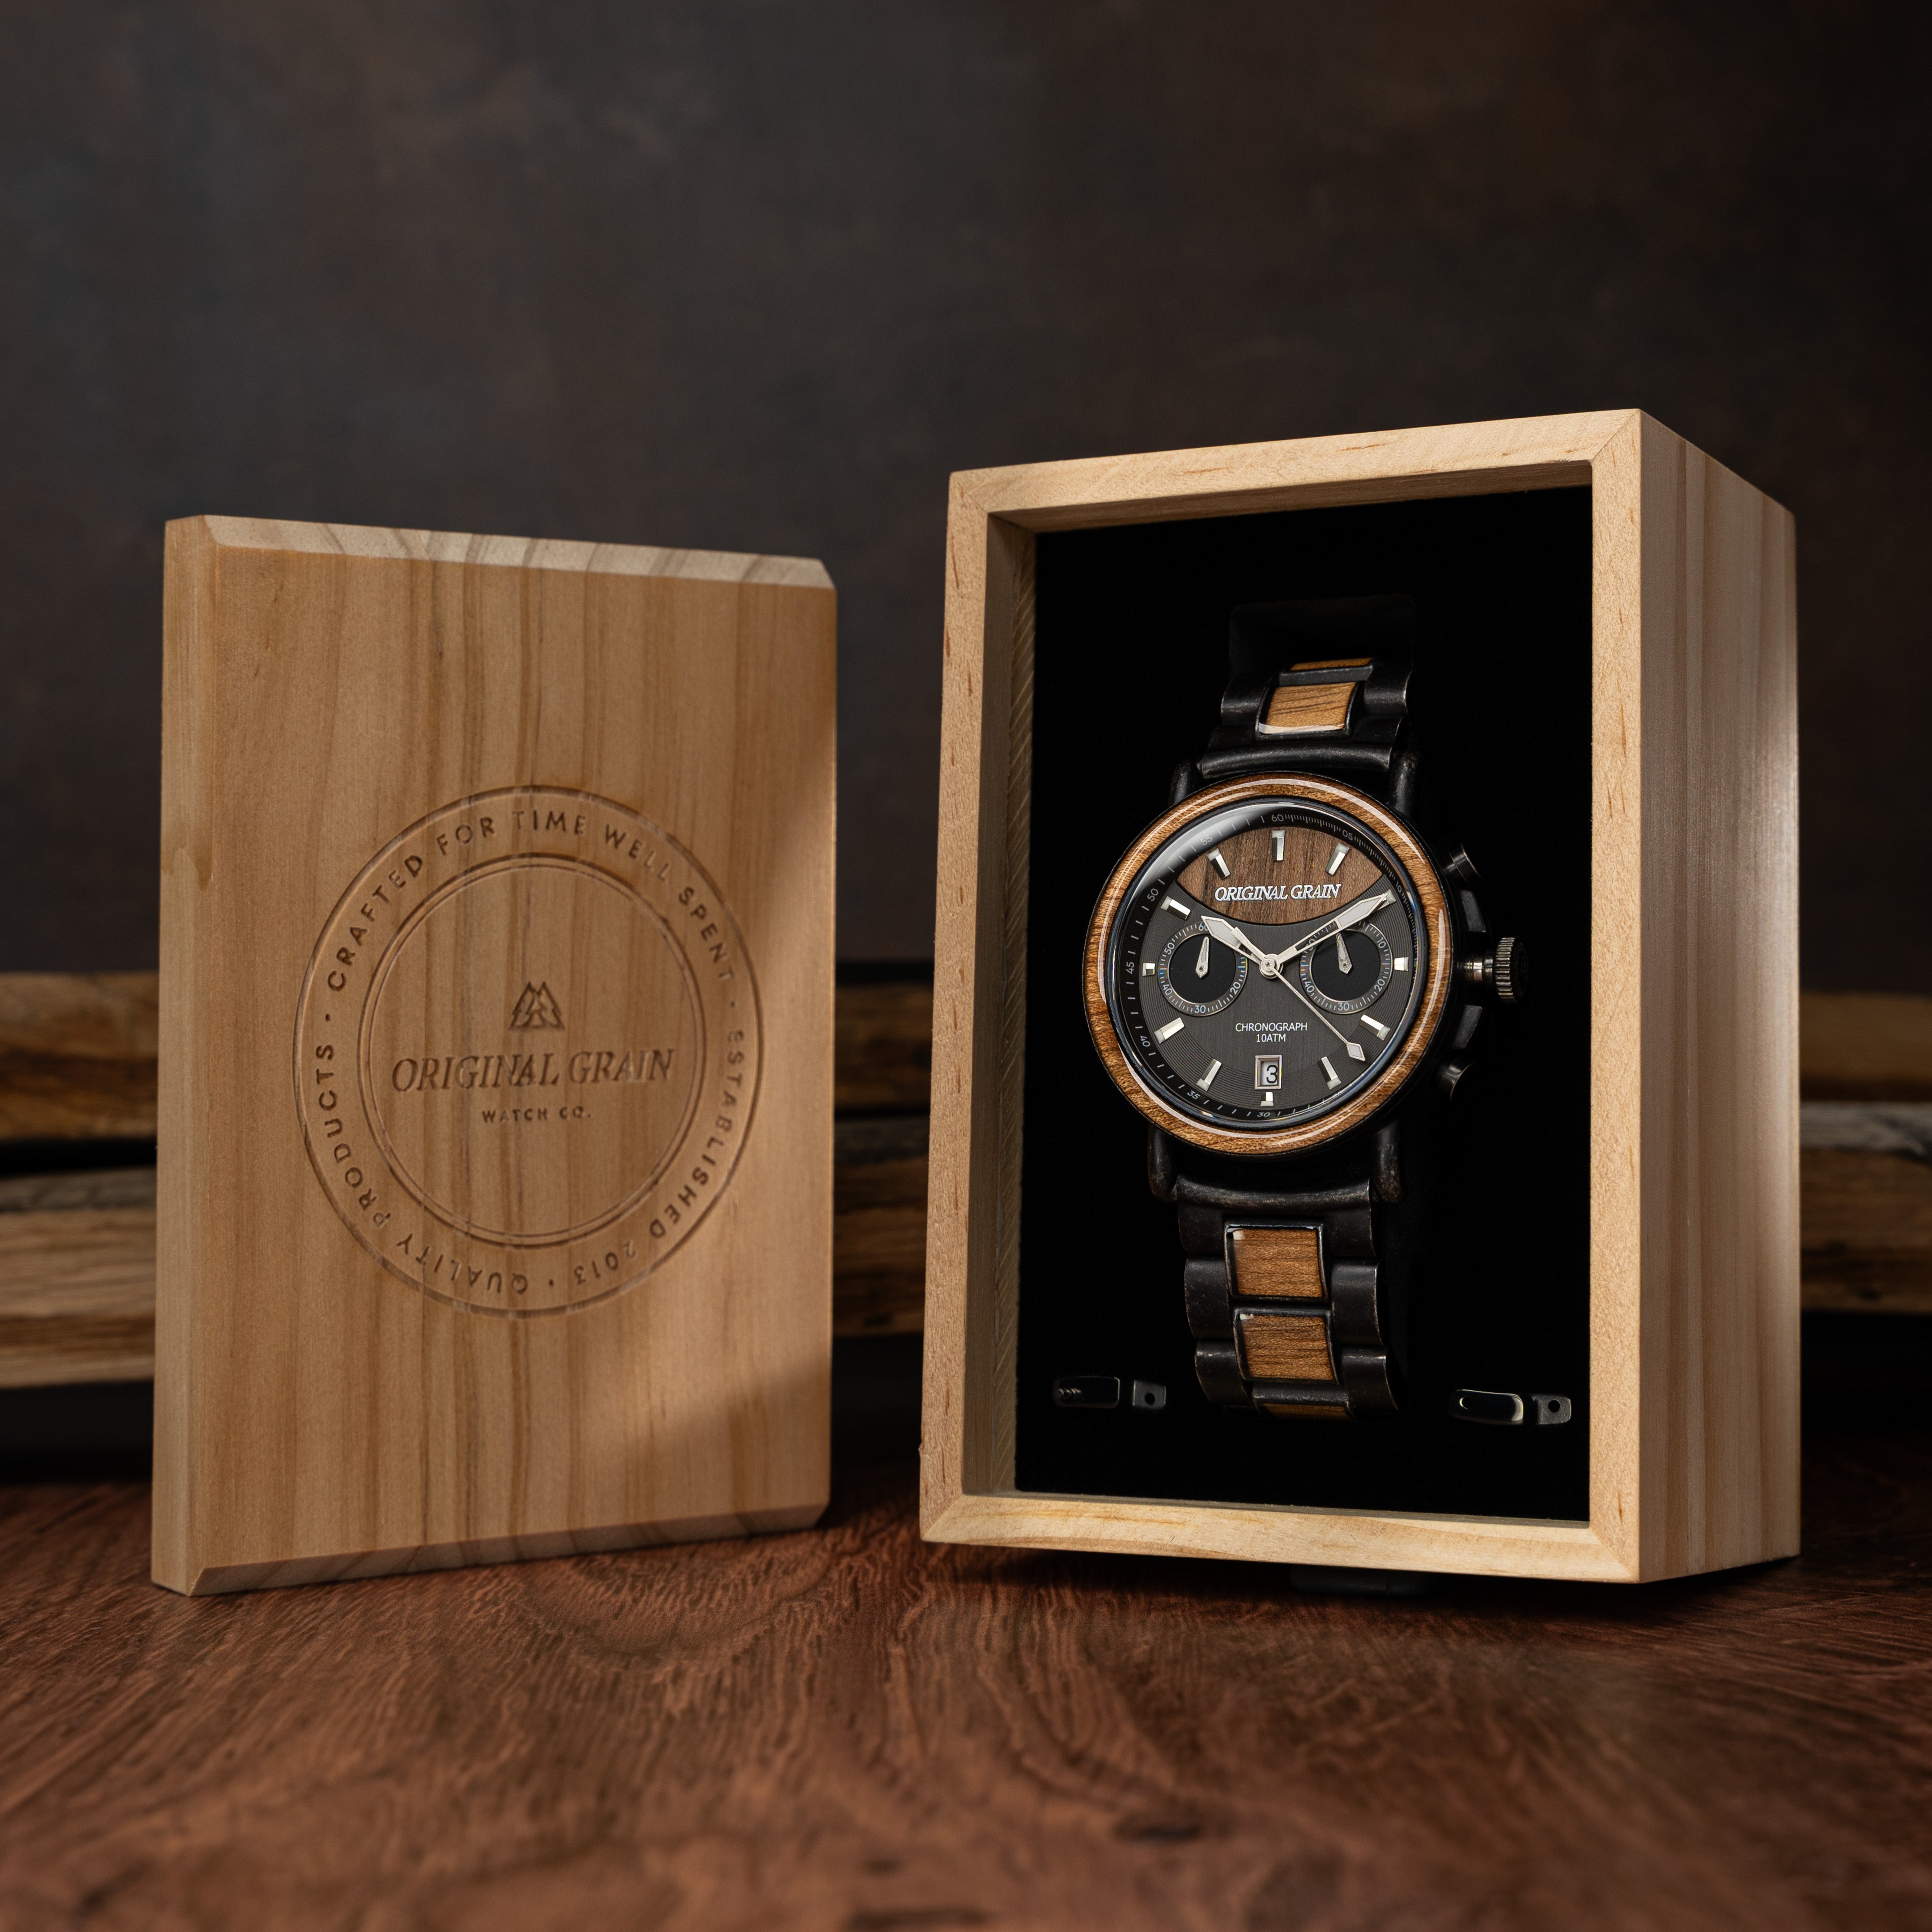 Go Ahead And Treat Yourself To Some Badass Original Grain Watches, With Up  To 40% Off Before The Holidays - BroBible